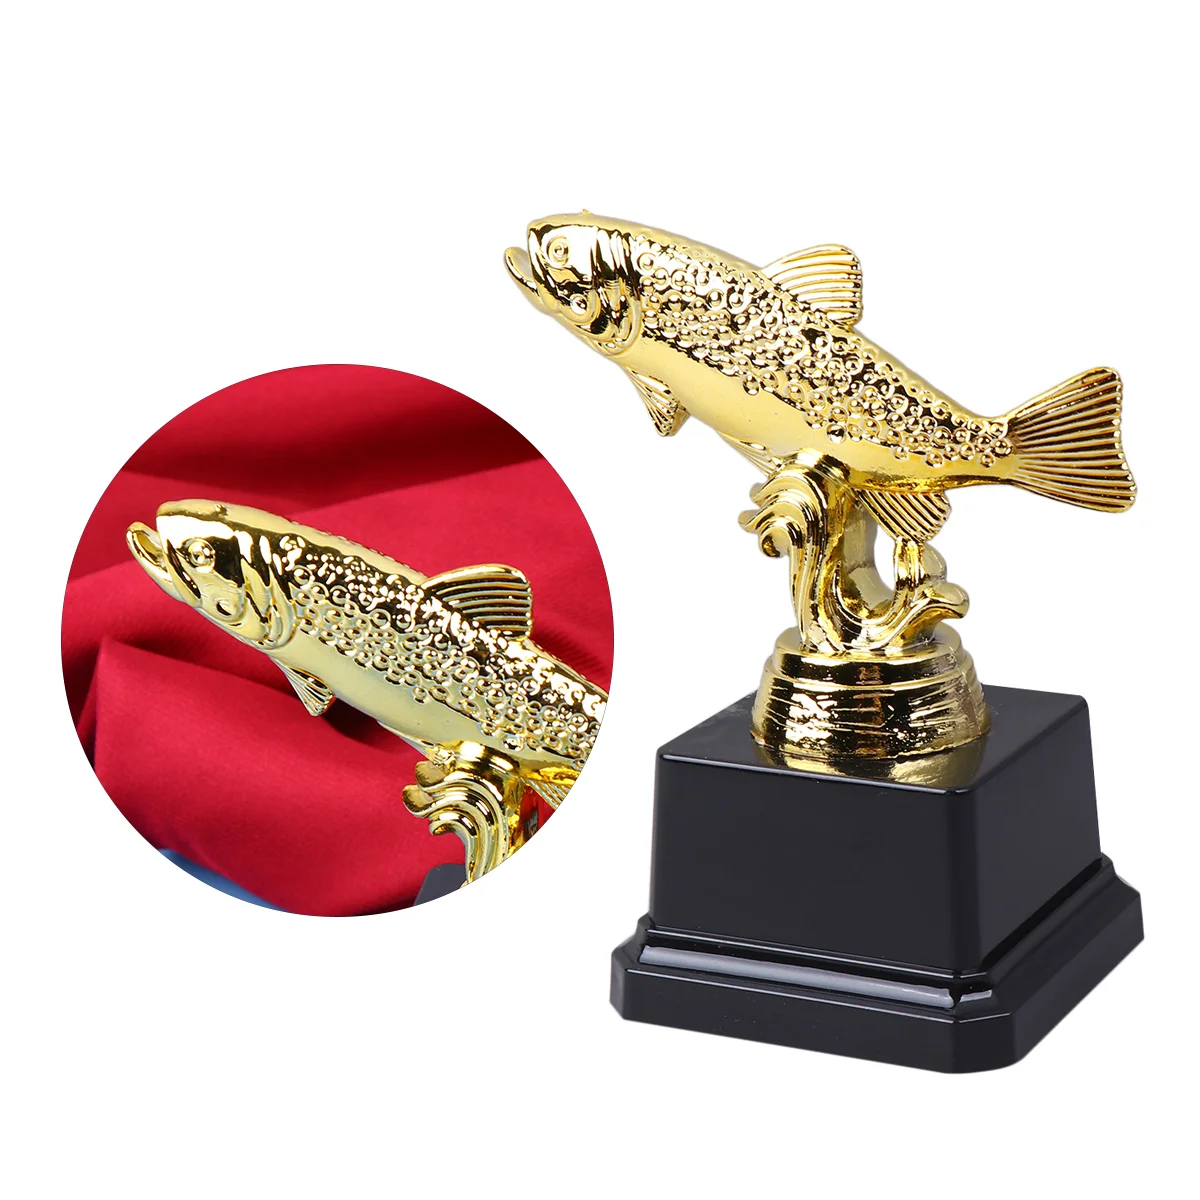 

Trophy Award Cup Kids Trophies Party Gold Prize Winning Statue Football Favor Creative Achievement Ceremony Medals Awards